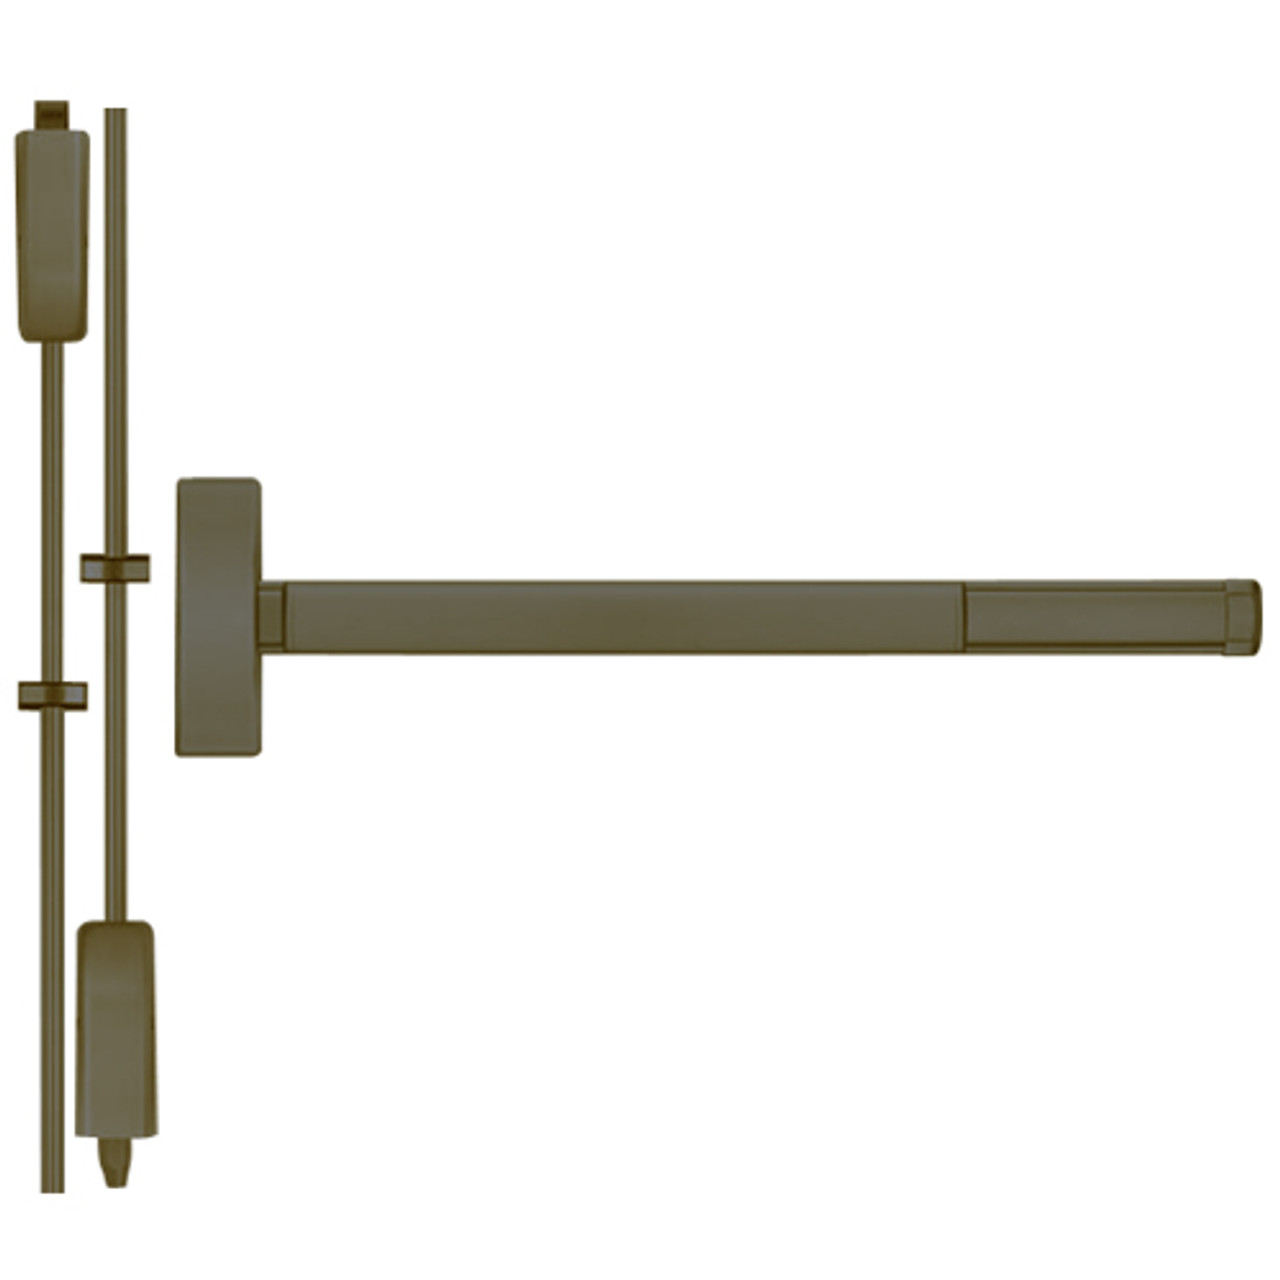 DE2203LBR-613-48 PHI 2200 Series Non Fire Rated Apex Surface Vertical Rod Device with Delayed Egress Prepped for Key Retracts Latchbolt in Oil Rubbed Bronze Finish